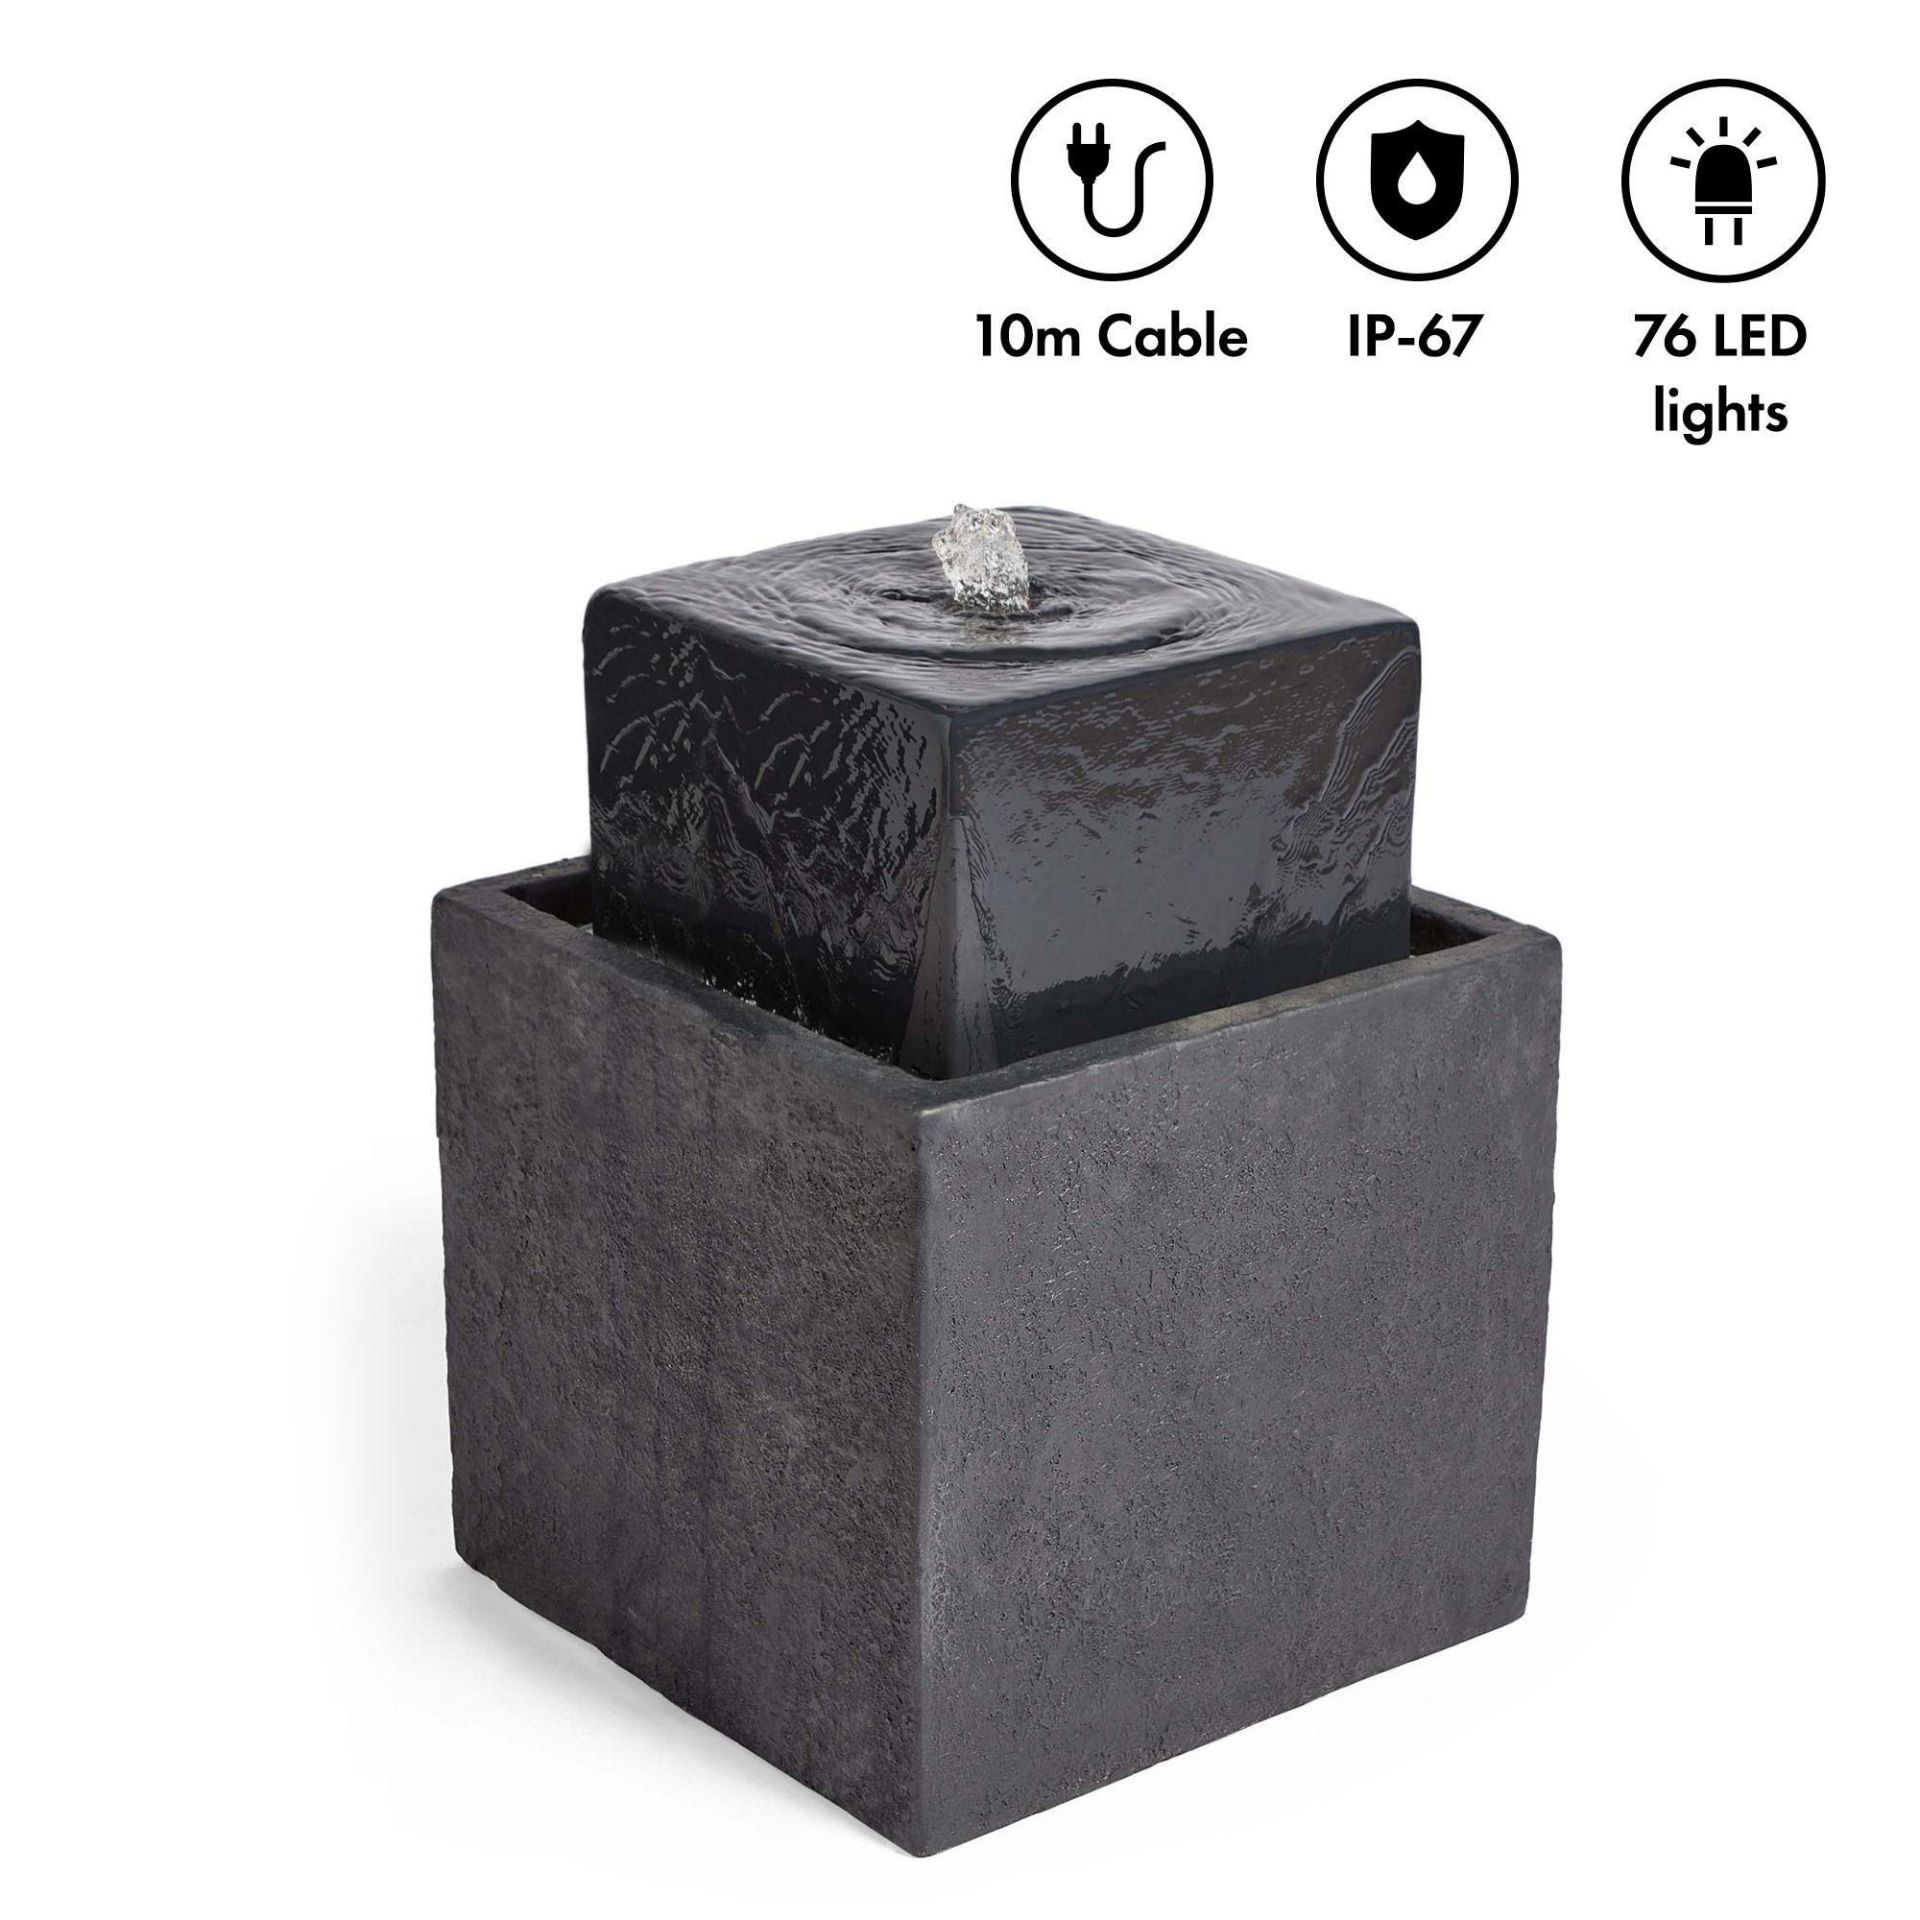 New & Boxed Square 2 Tier Water Feature. RRP £299.99. (REF671) – Indoor and Outdoor Cascading - Image 4 of 6